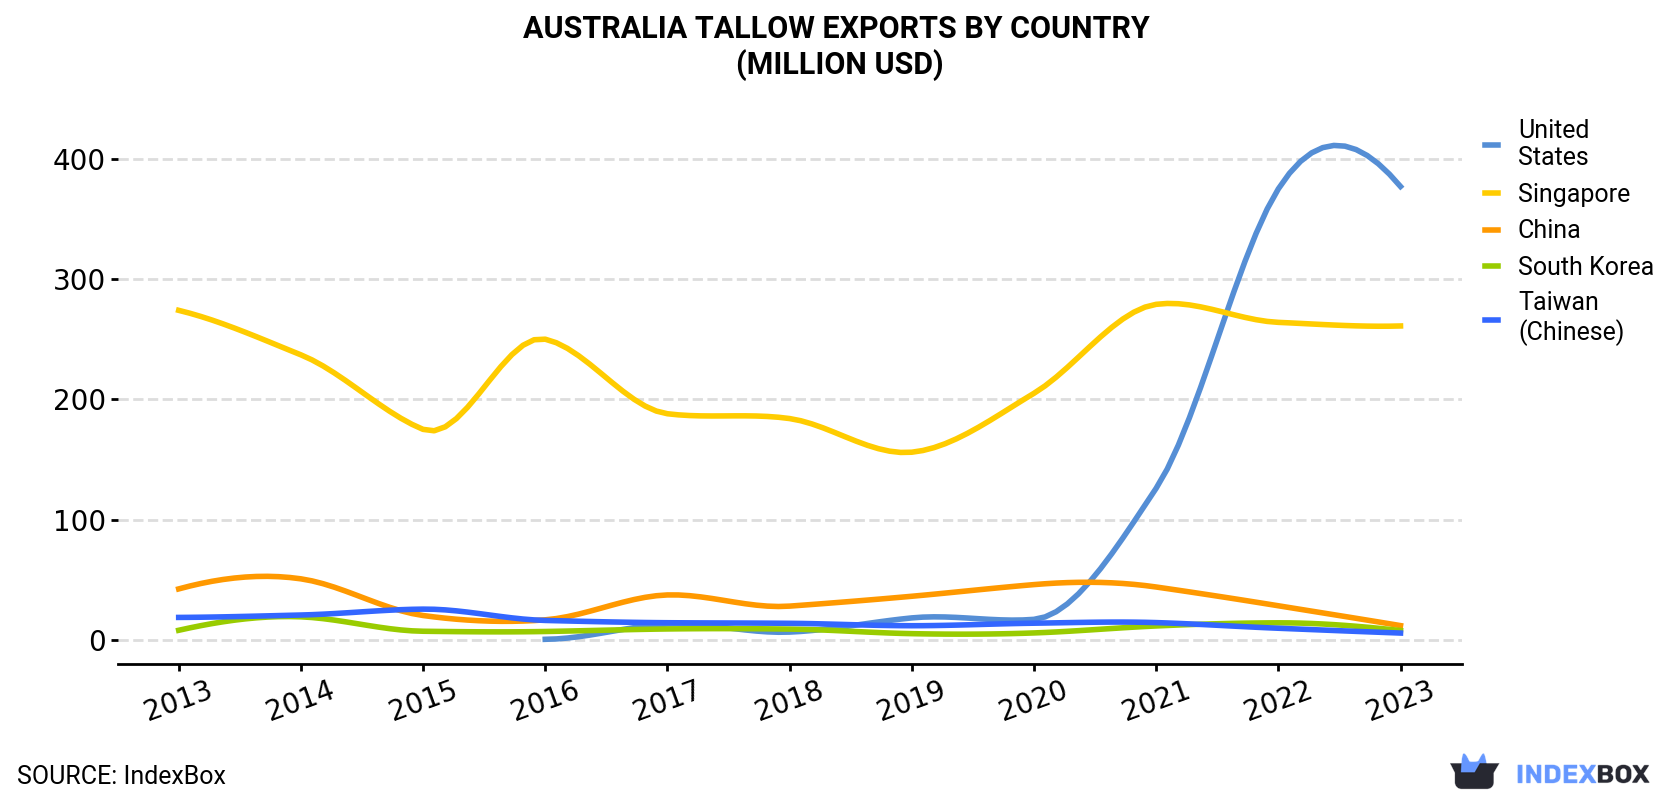 Australia Tallow Exports By Country (Million USD)